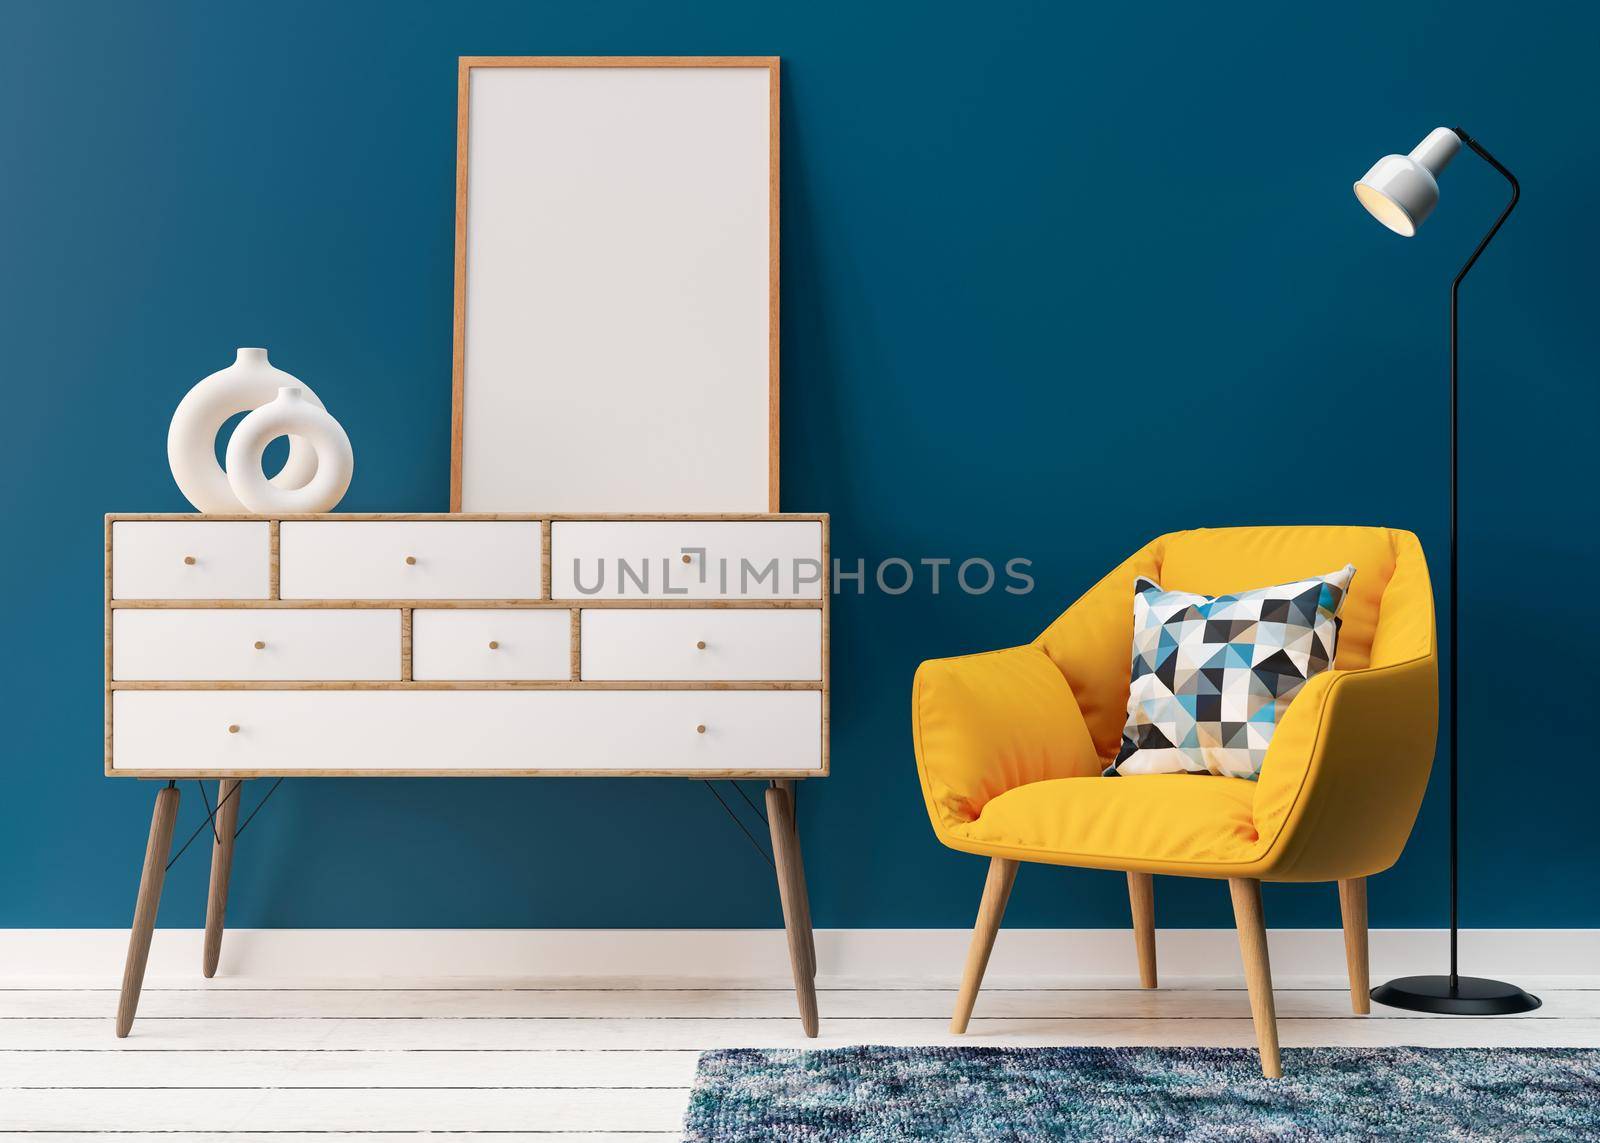 Blank vertical picture frame on blue wall in living room. Mock up poster frame in modern interior. Yellow armchair, wooden console. 3D render, 3D illustration. Free space, copy space for your design